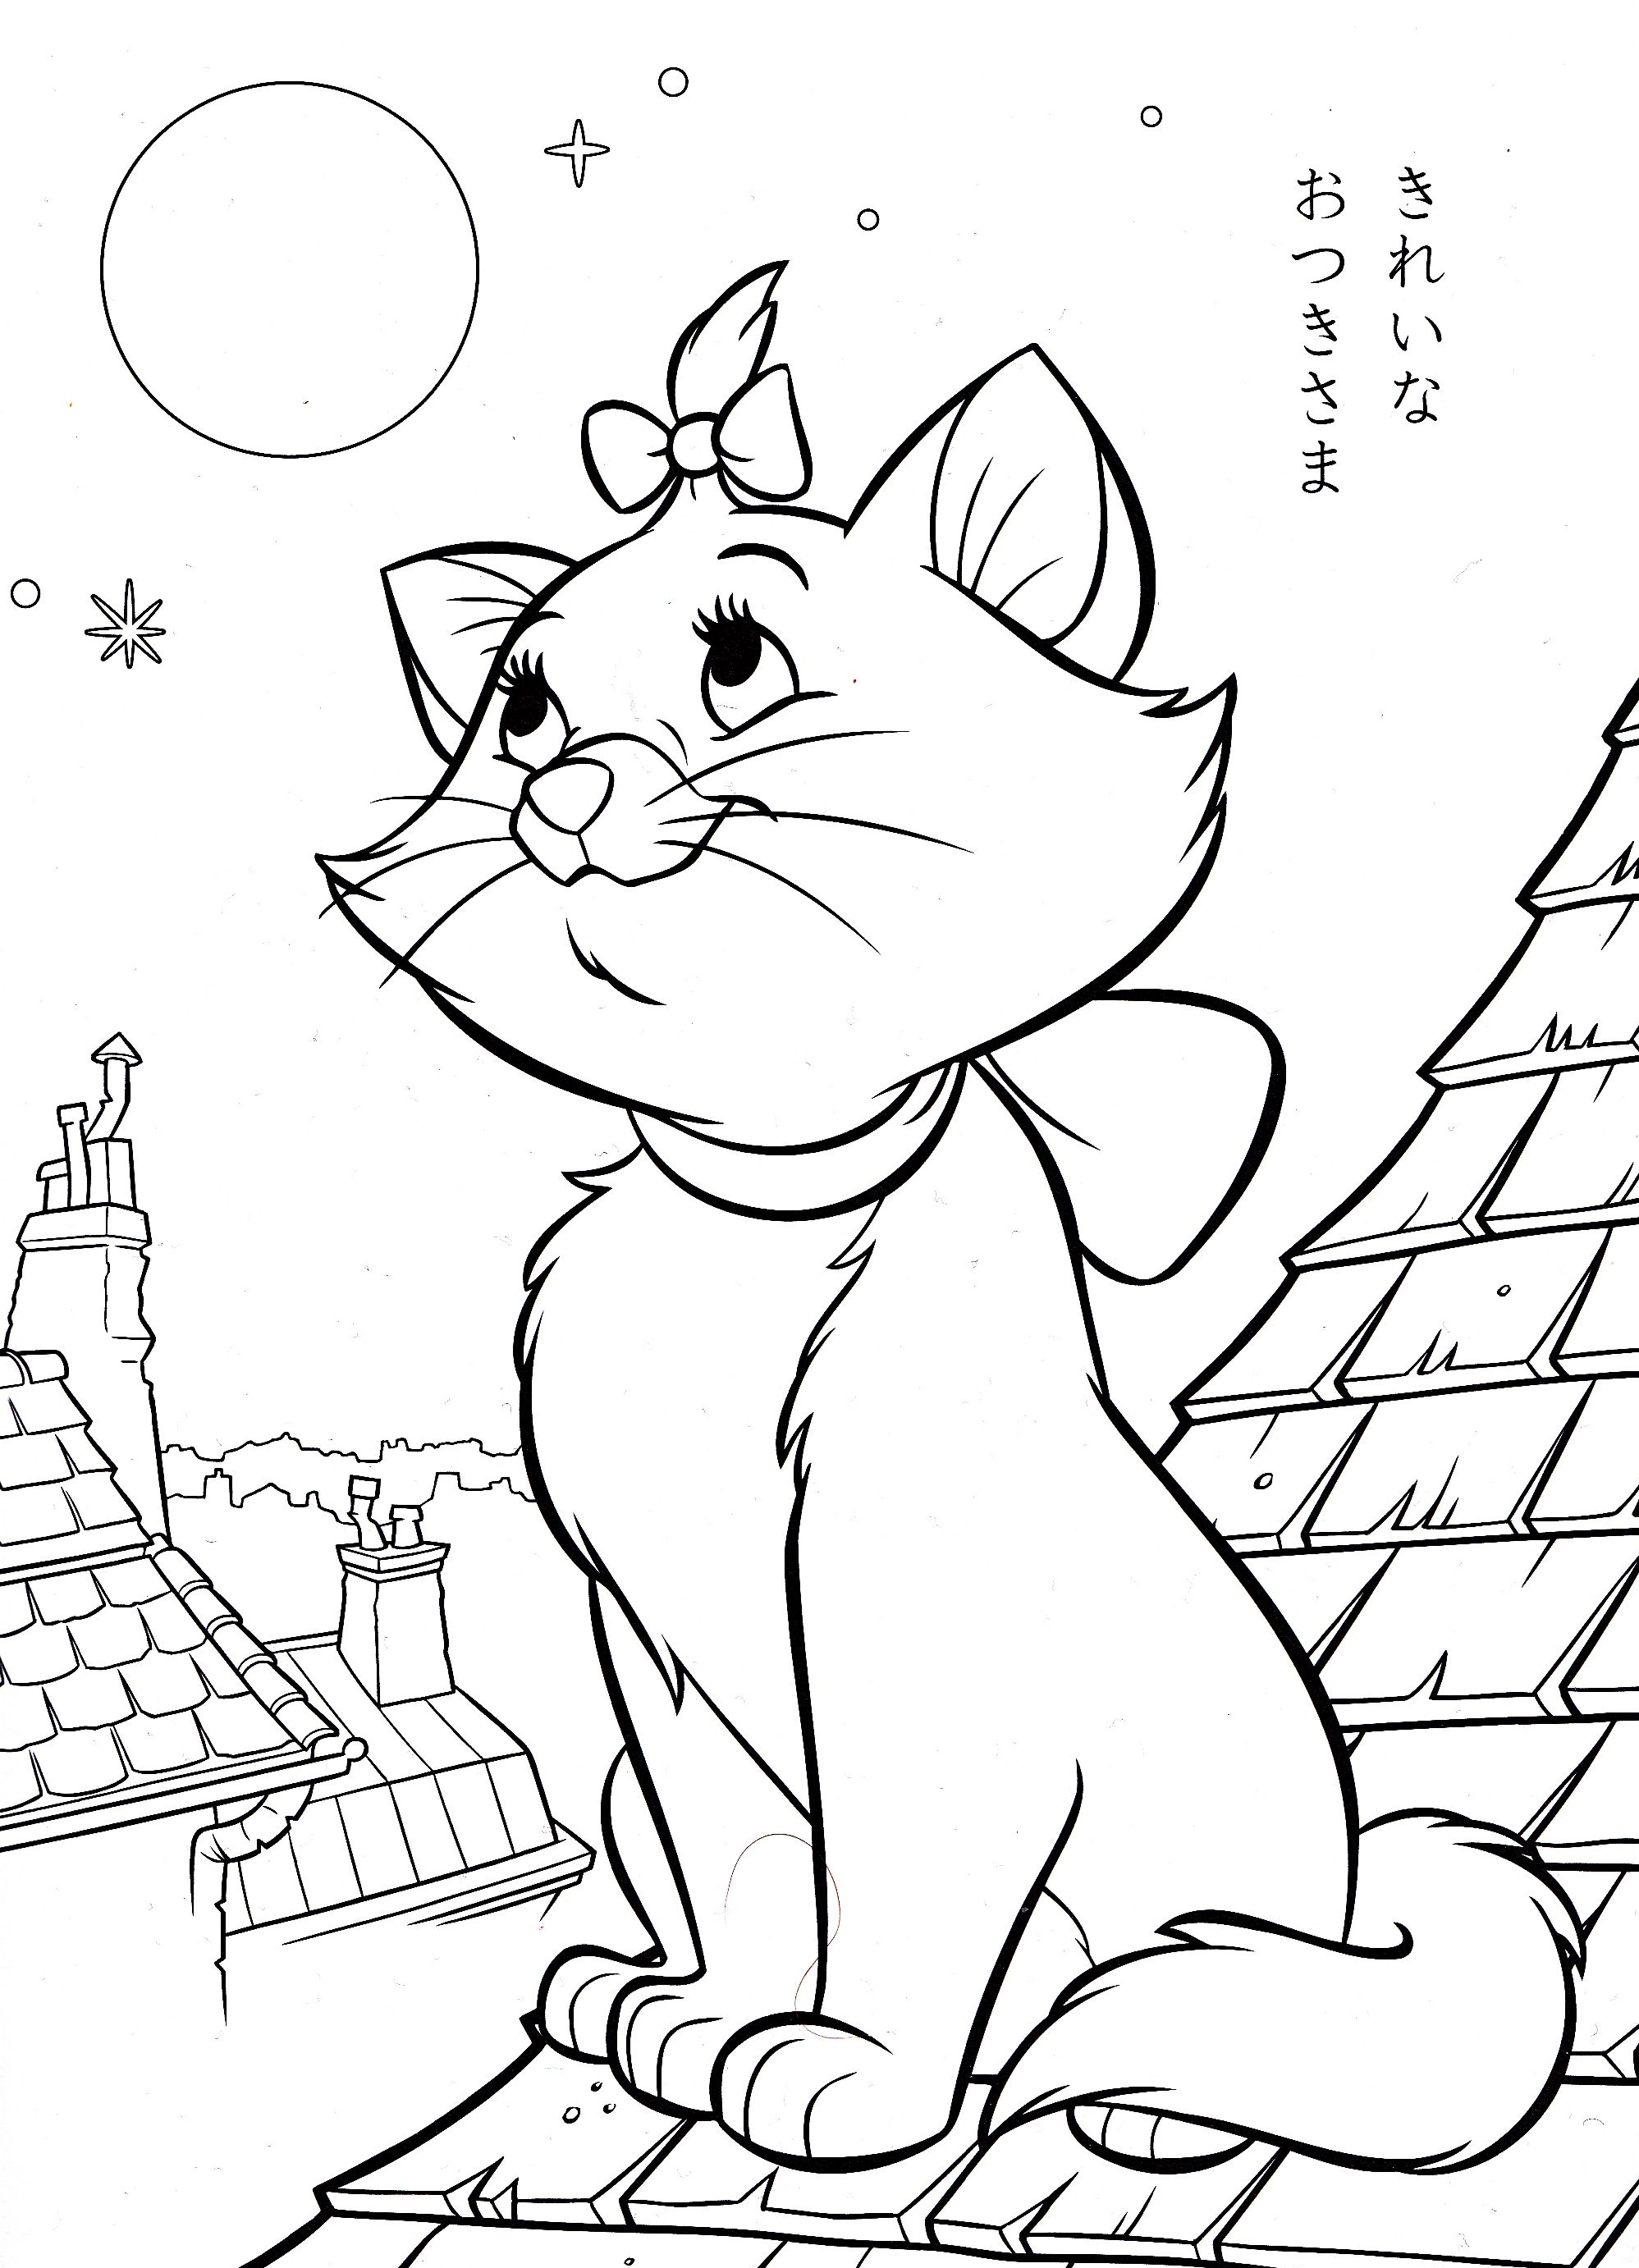 Disney coloring pages for adults